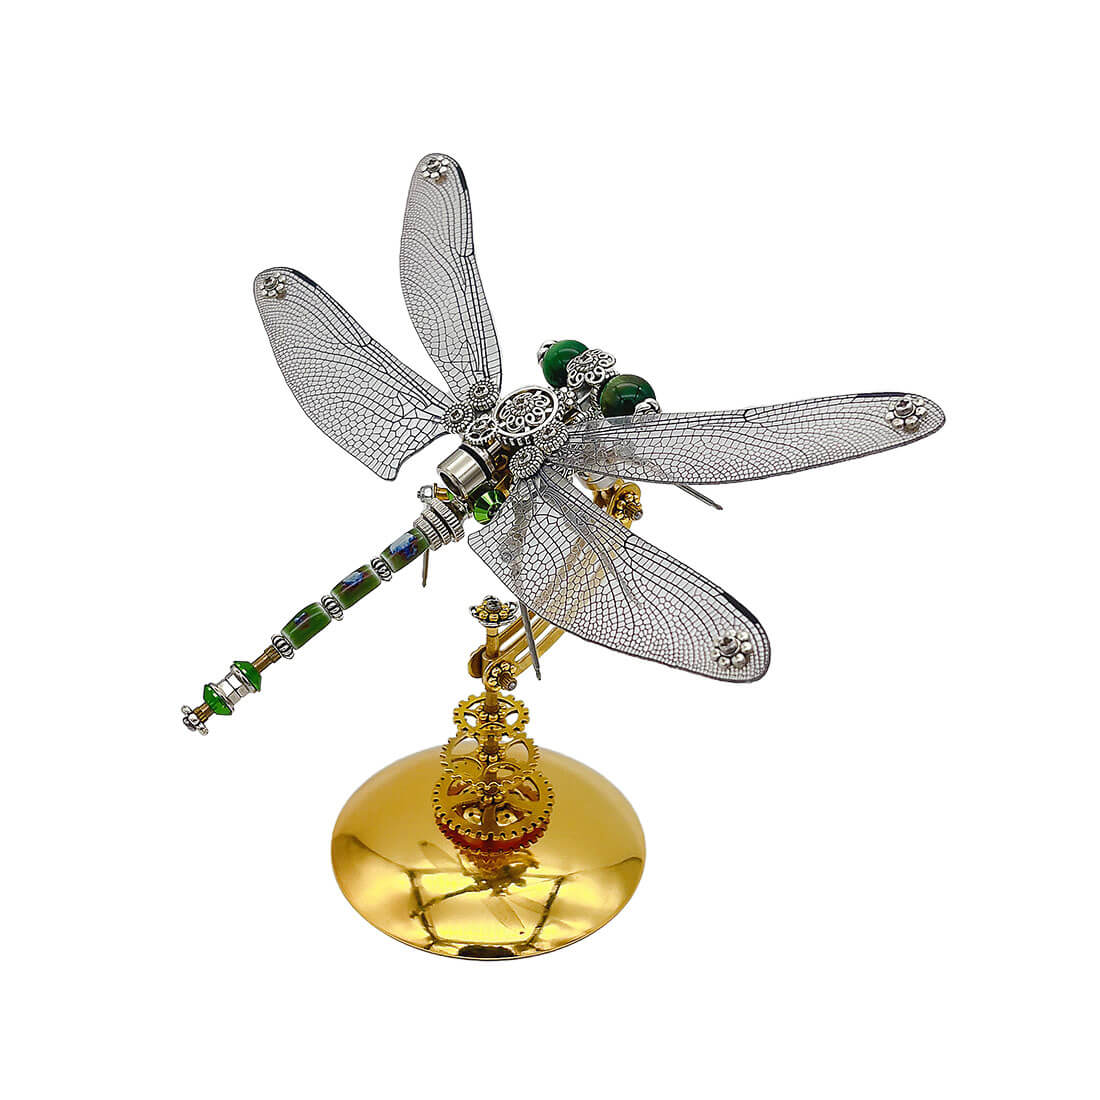 Steampunk Lesser Emperor Dragonfly 3D Mechanical Insect DIY Assembly Model (200+PCS)